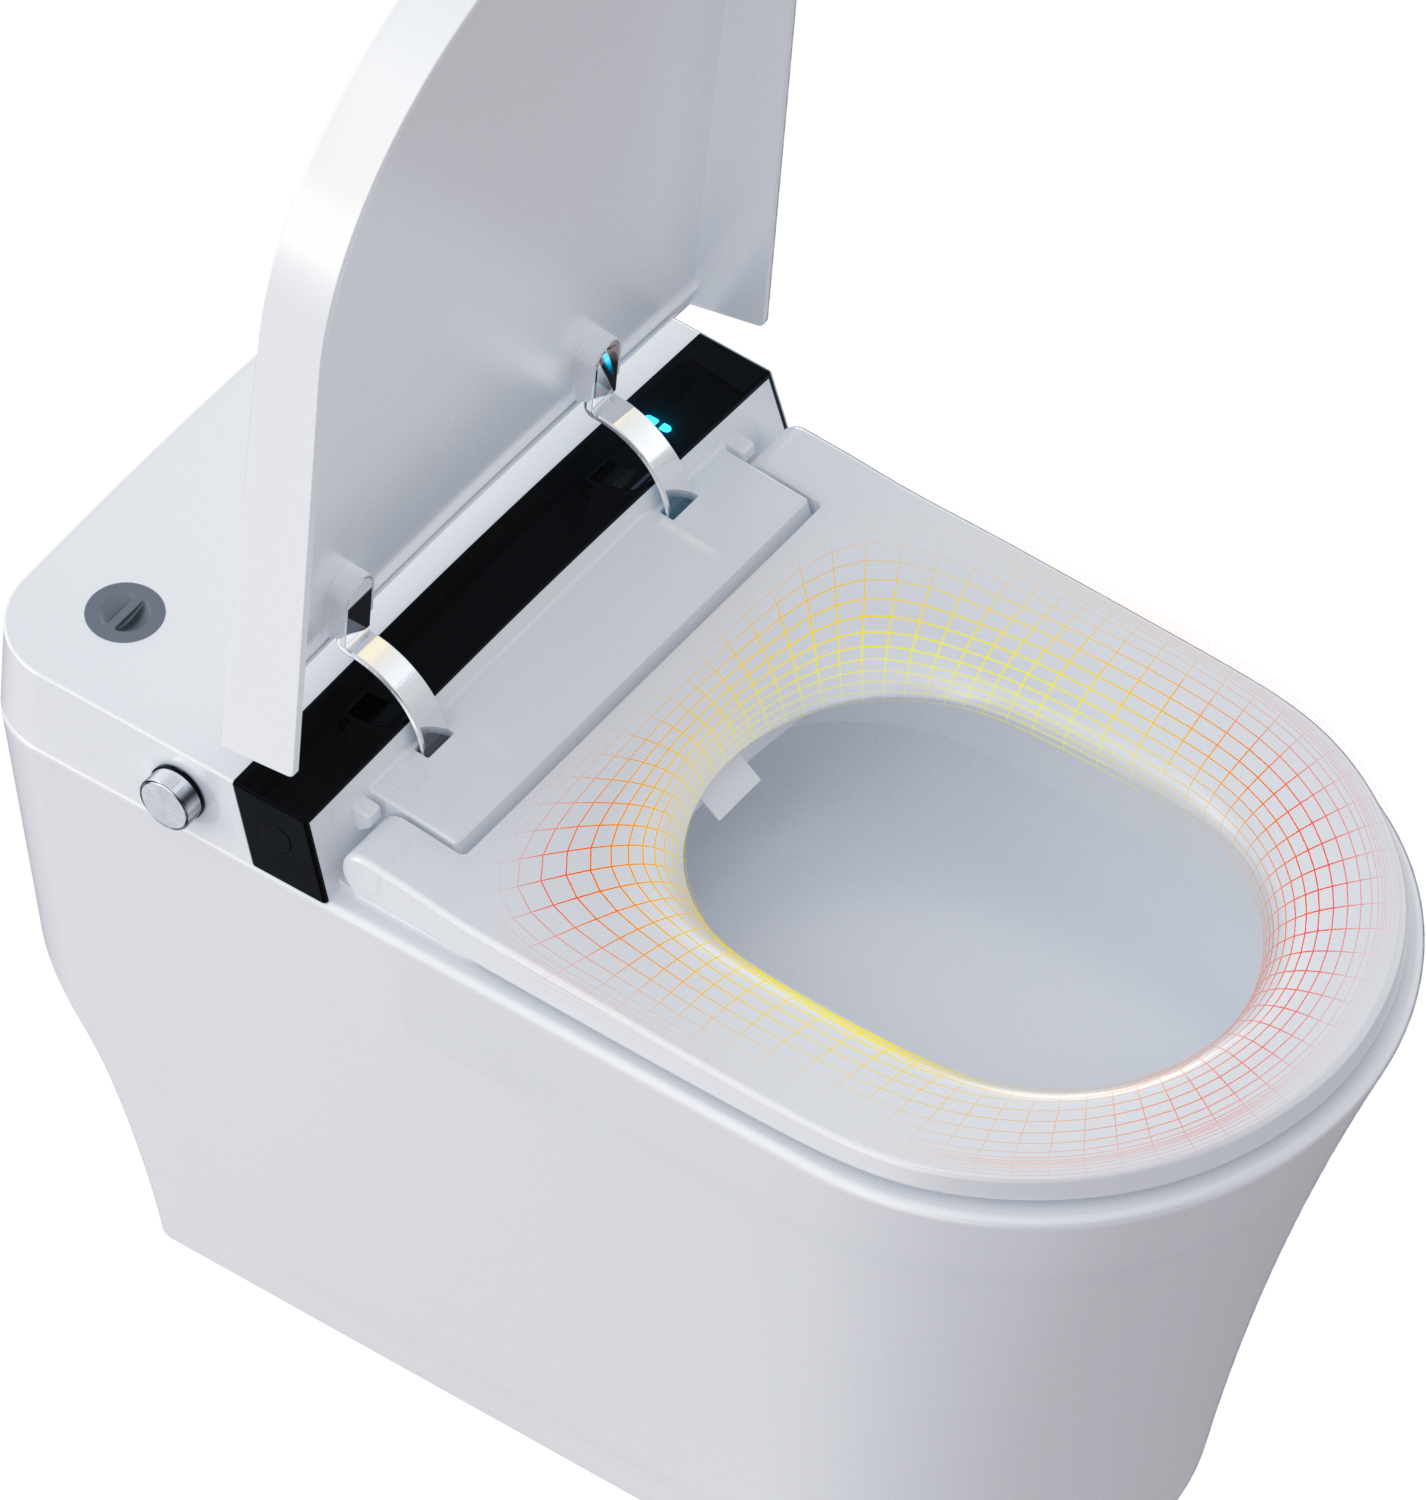 Smart Clean One Piece Toilet with Auto-Flush, Warm Water, Air Drying Function, Heated Seat, Remote Control